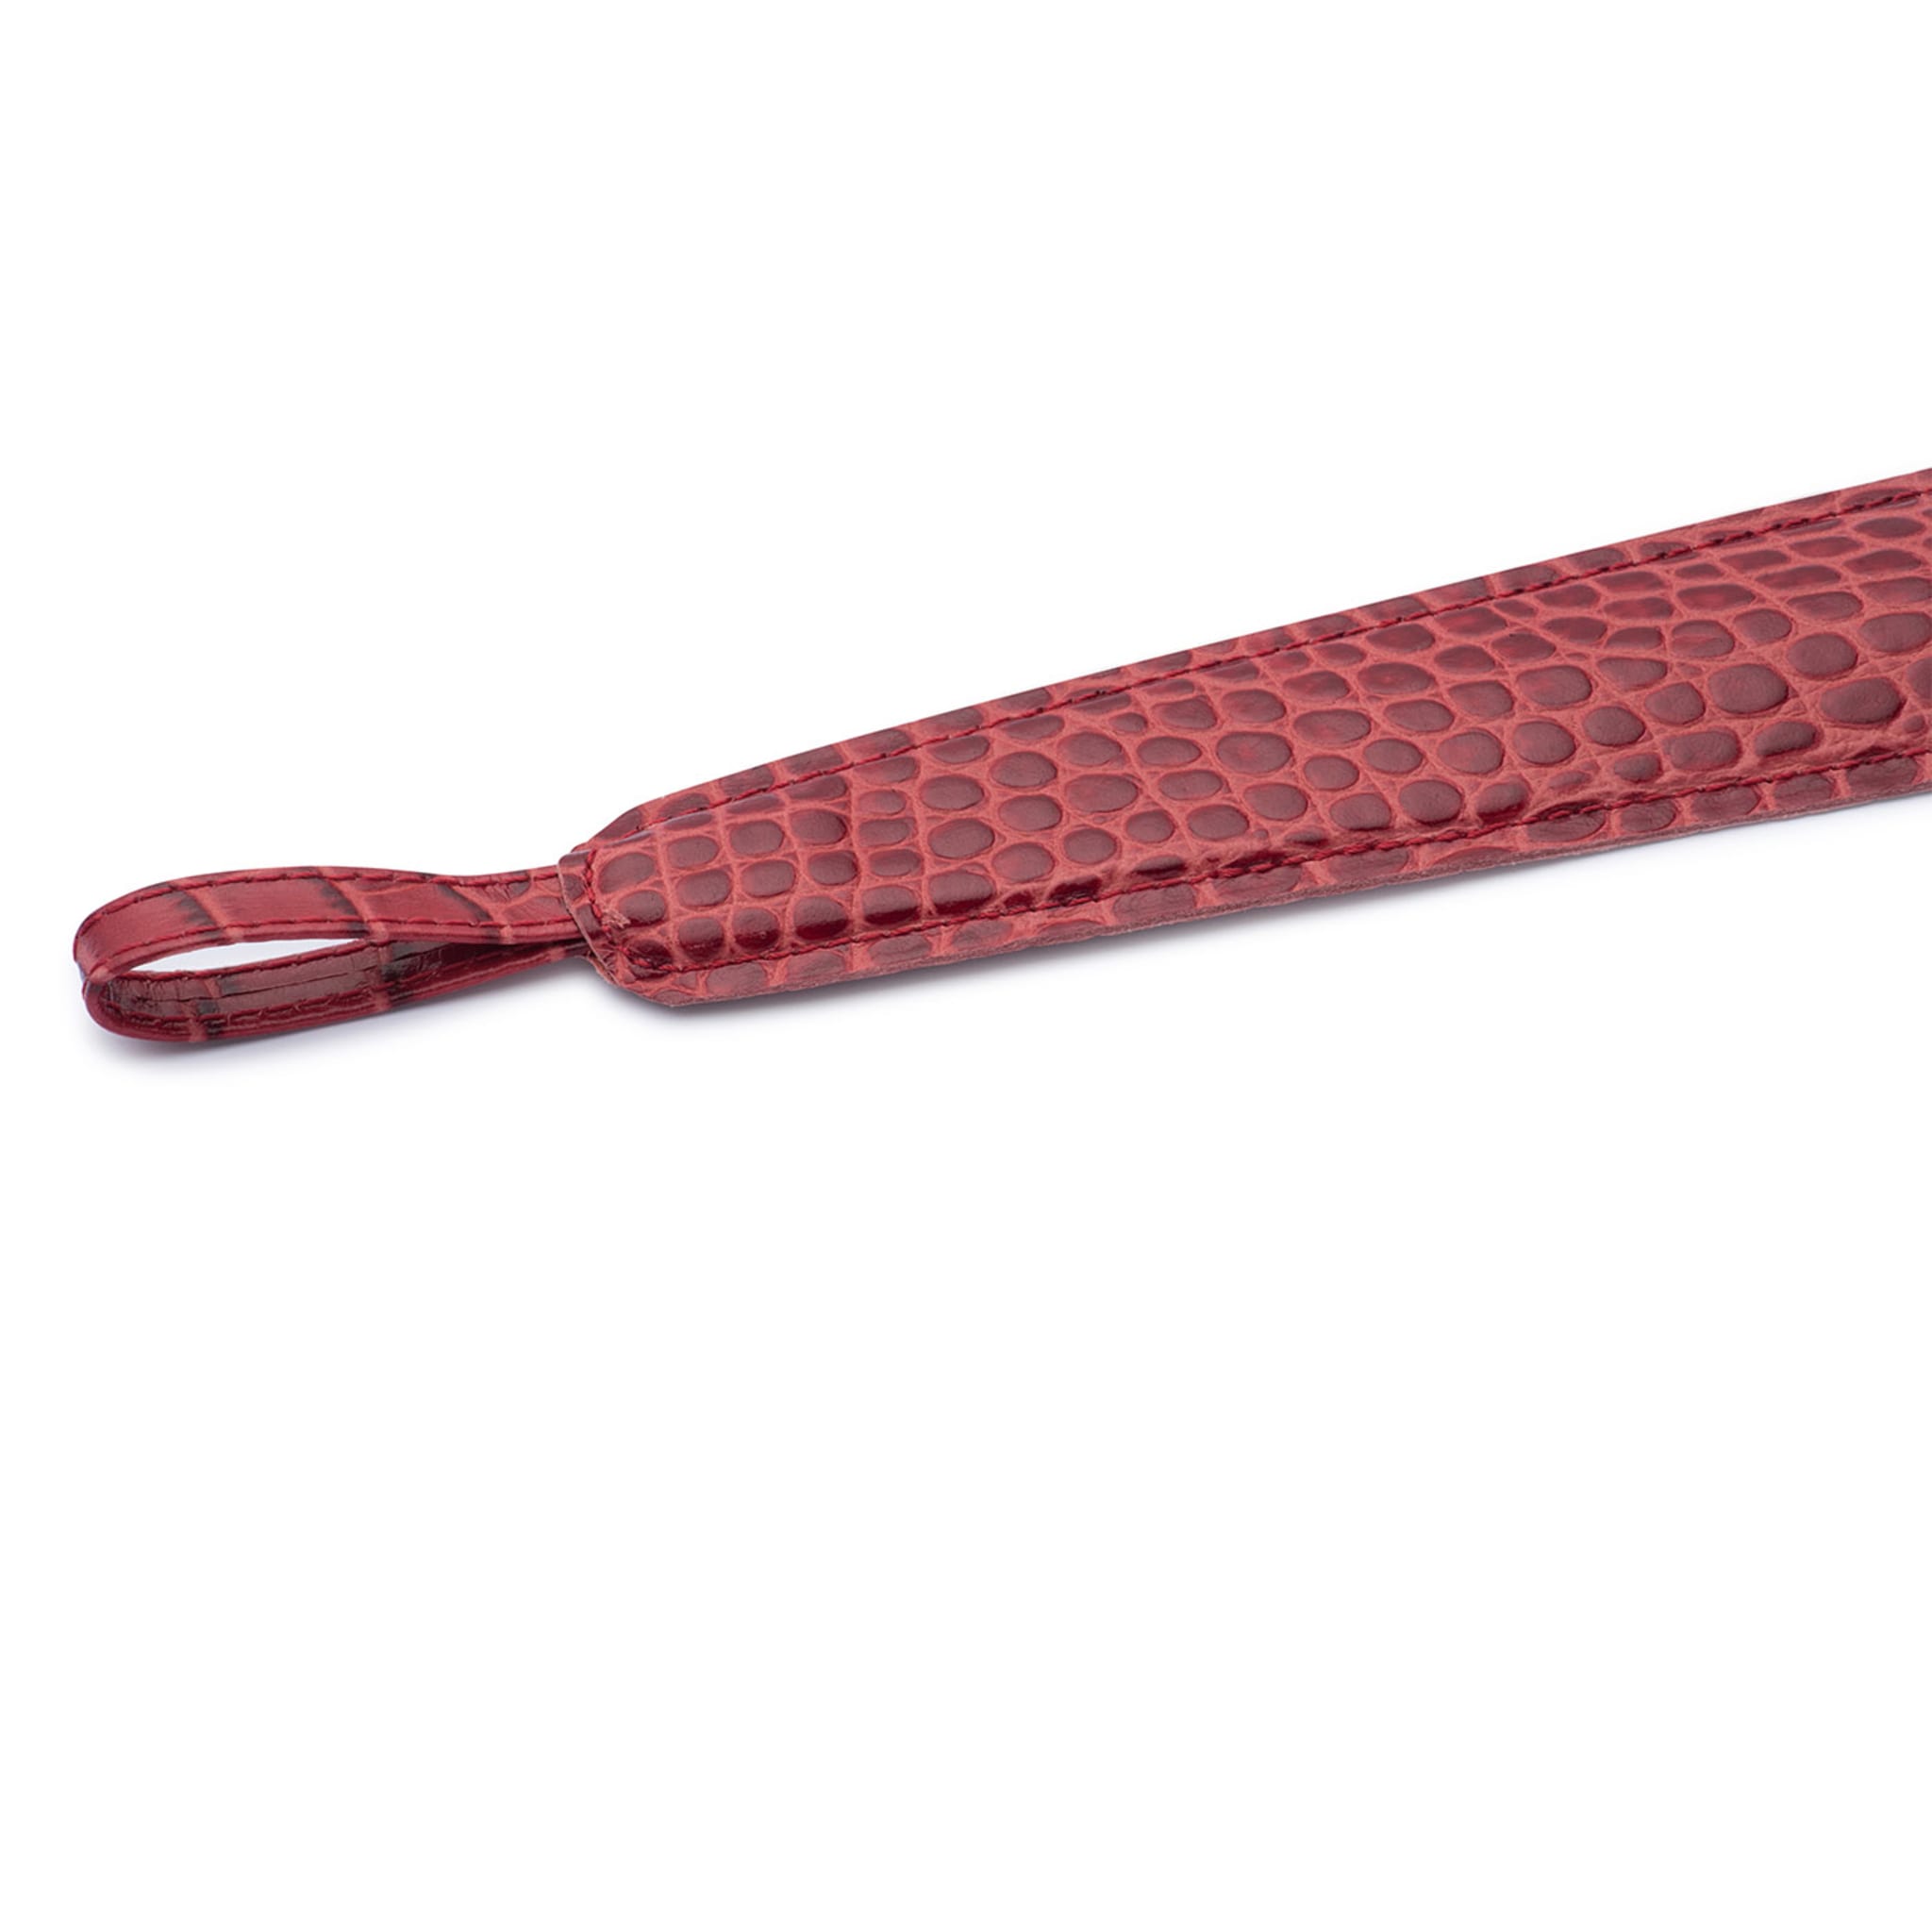 Red Mock-Croc Leather Shoe Horn - Alternative view 1